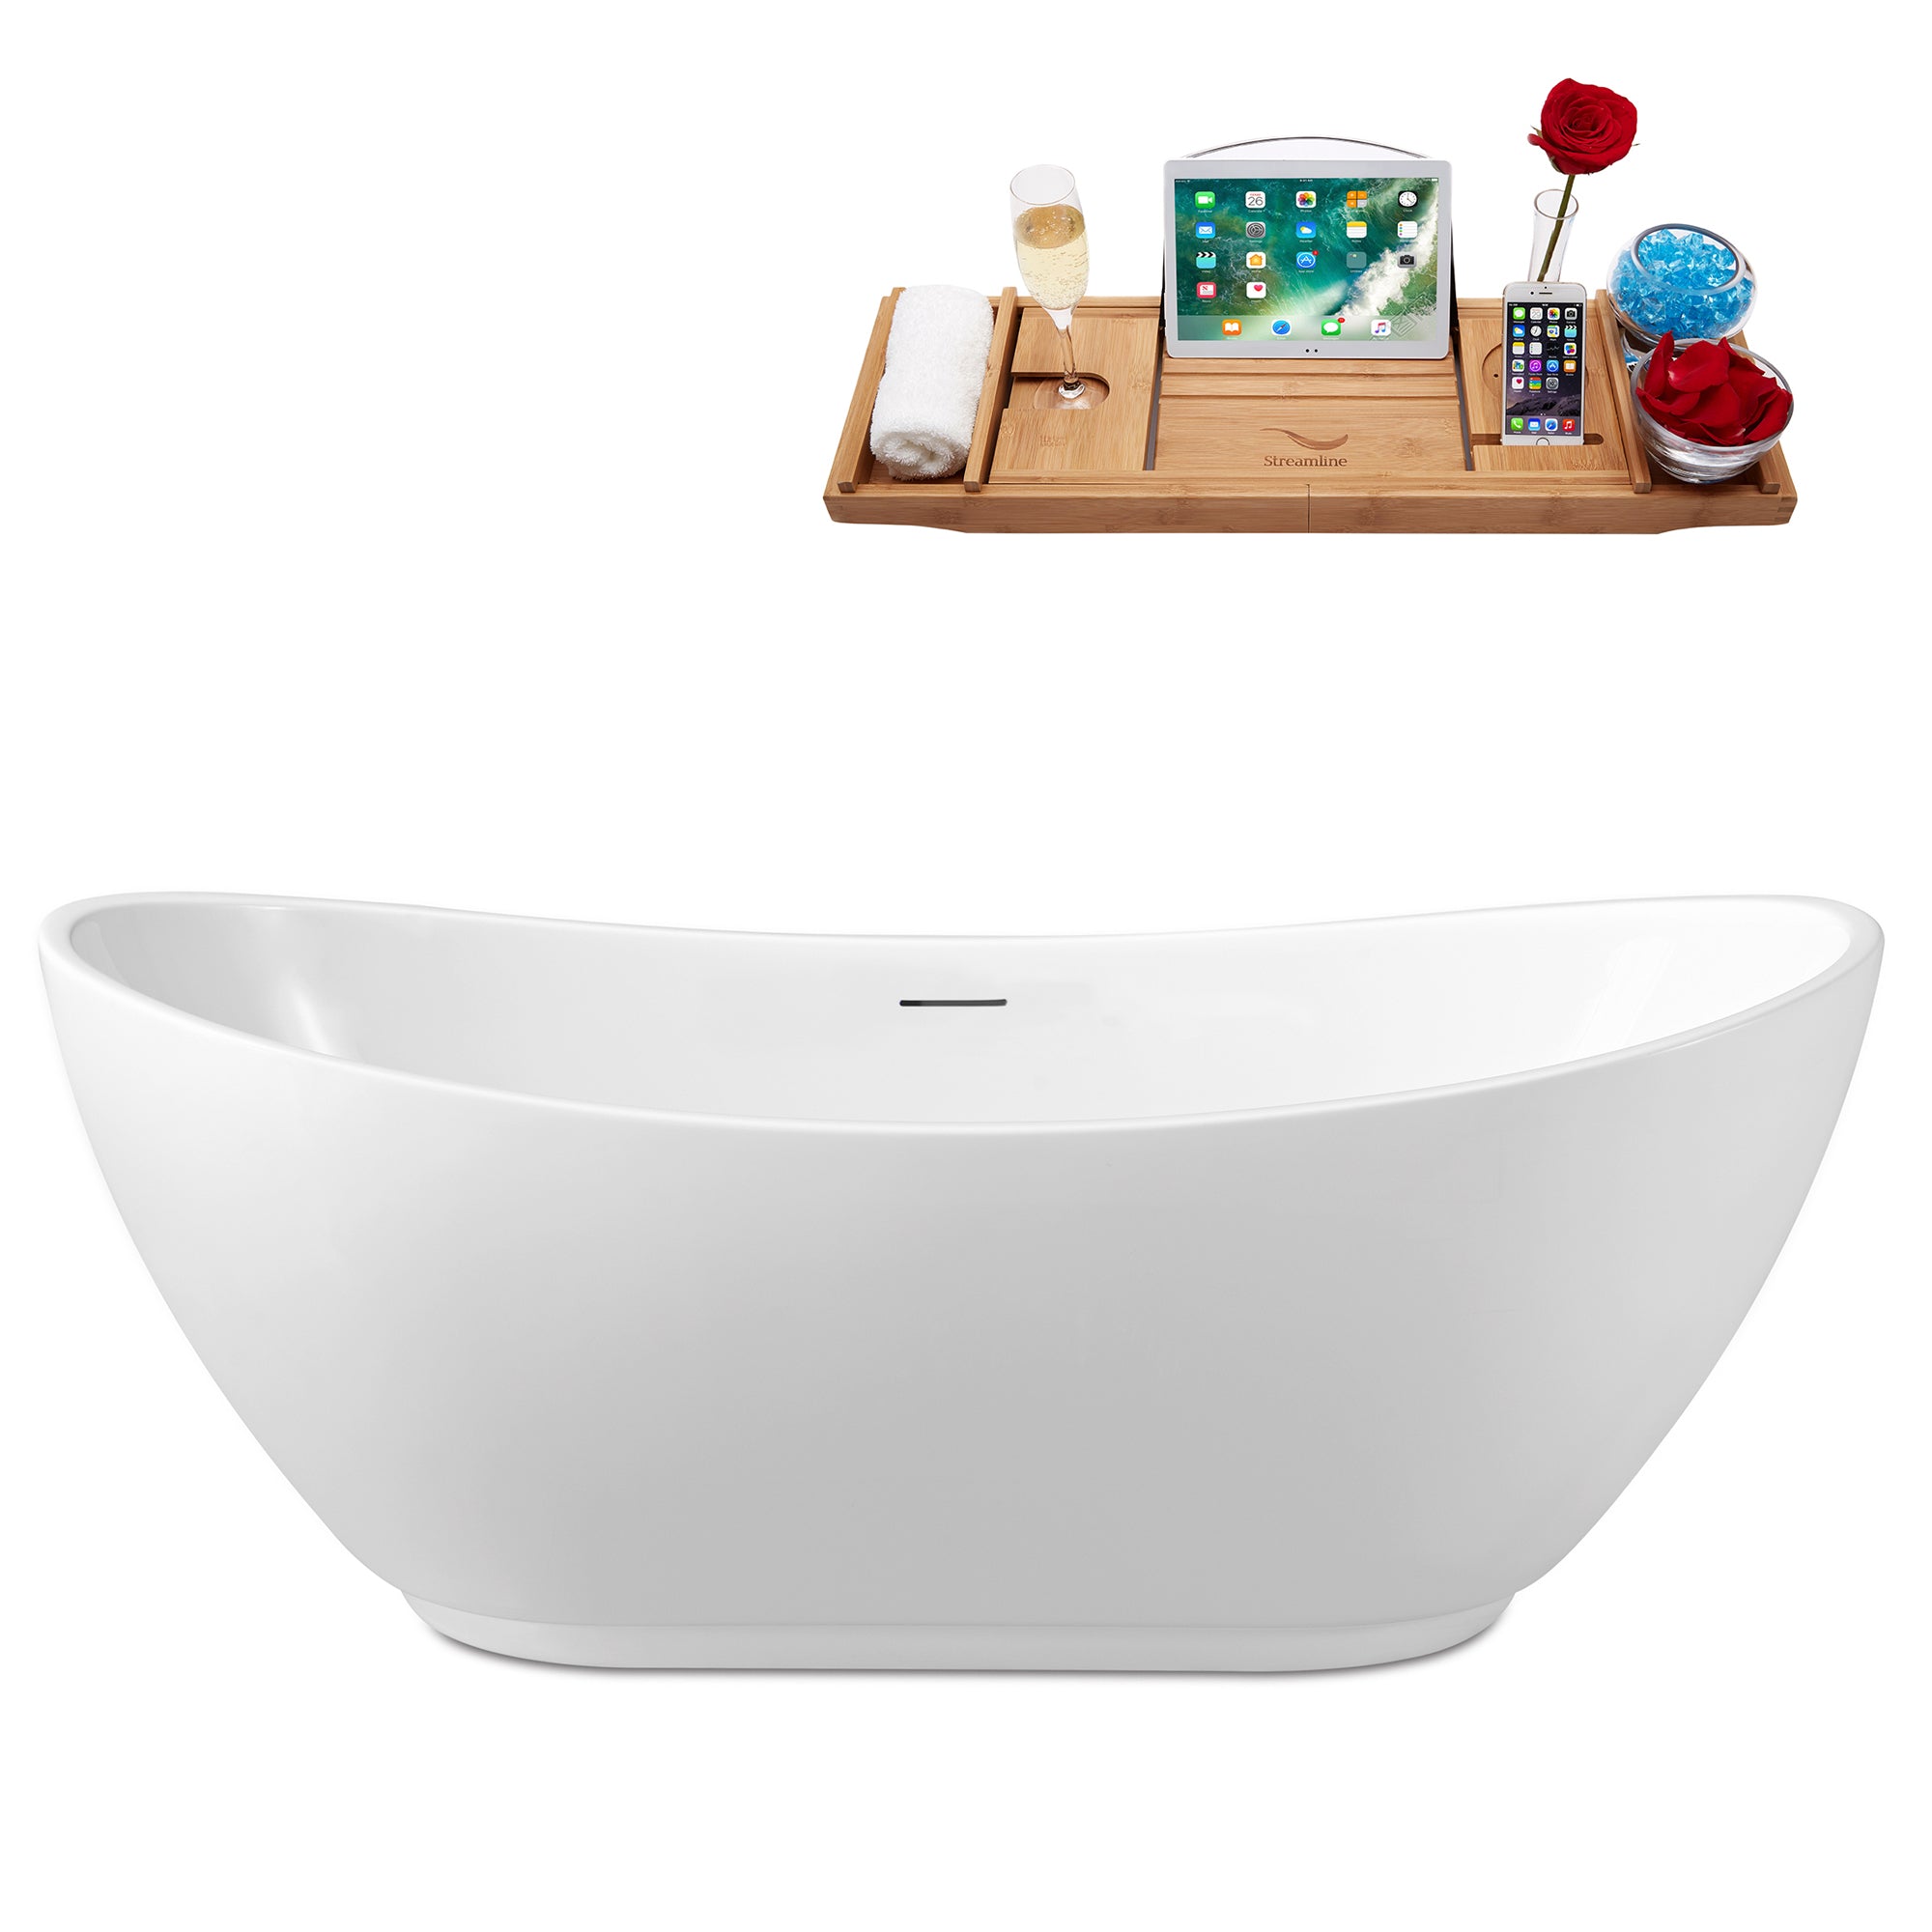 62'' Streamline N590BNK Freestanding Tub and Tray With Internal Drain image